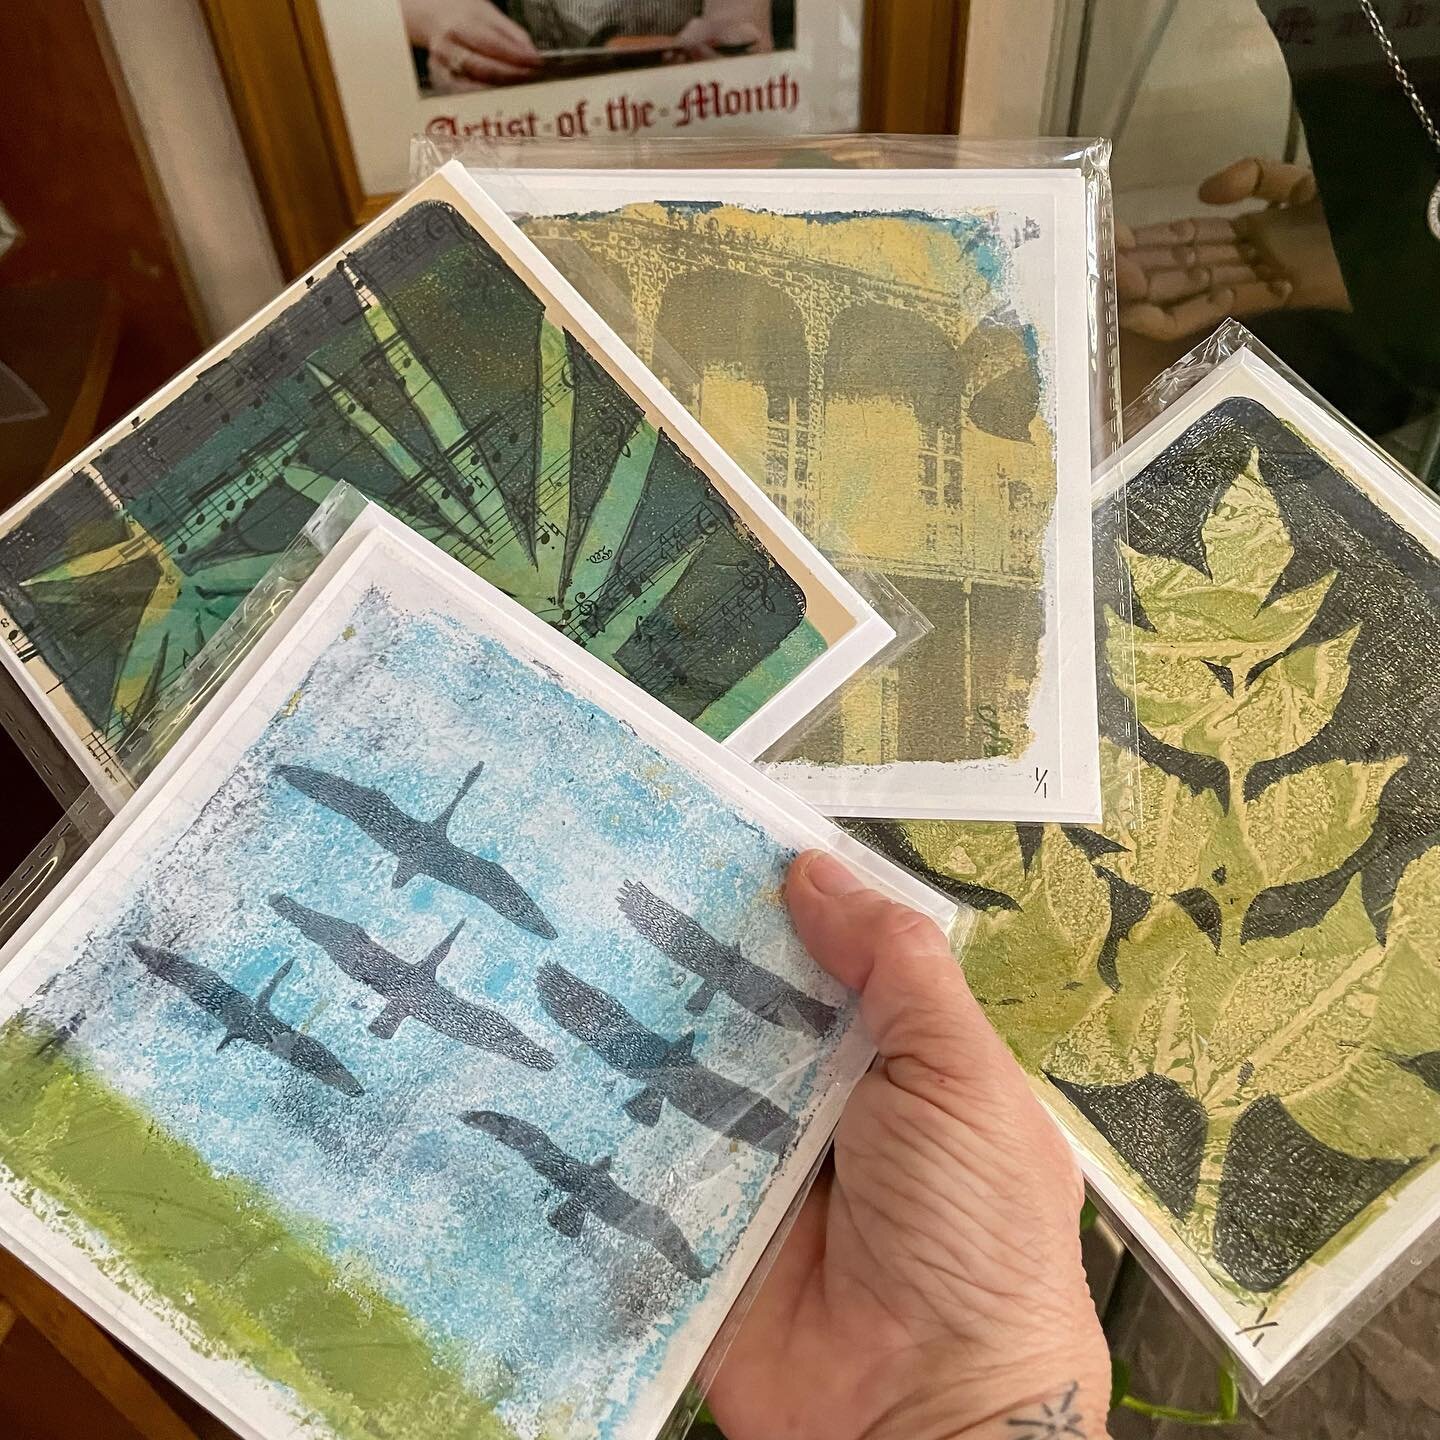 I am the &ldquo;Artist of the Month&rdquo; at @dutchalley this month. To recognize this occasion, I will be offering some of my mono-print greeting cards, complimentary w purchases of my jewelry.  I started messing around w a gelli plate earlier this